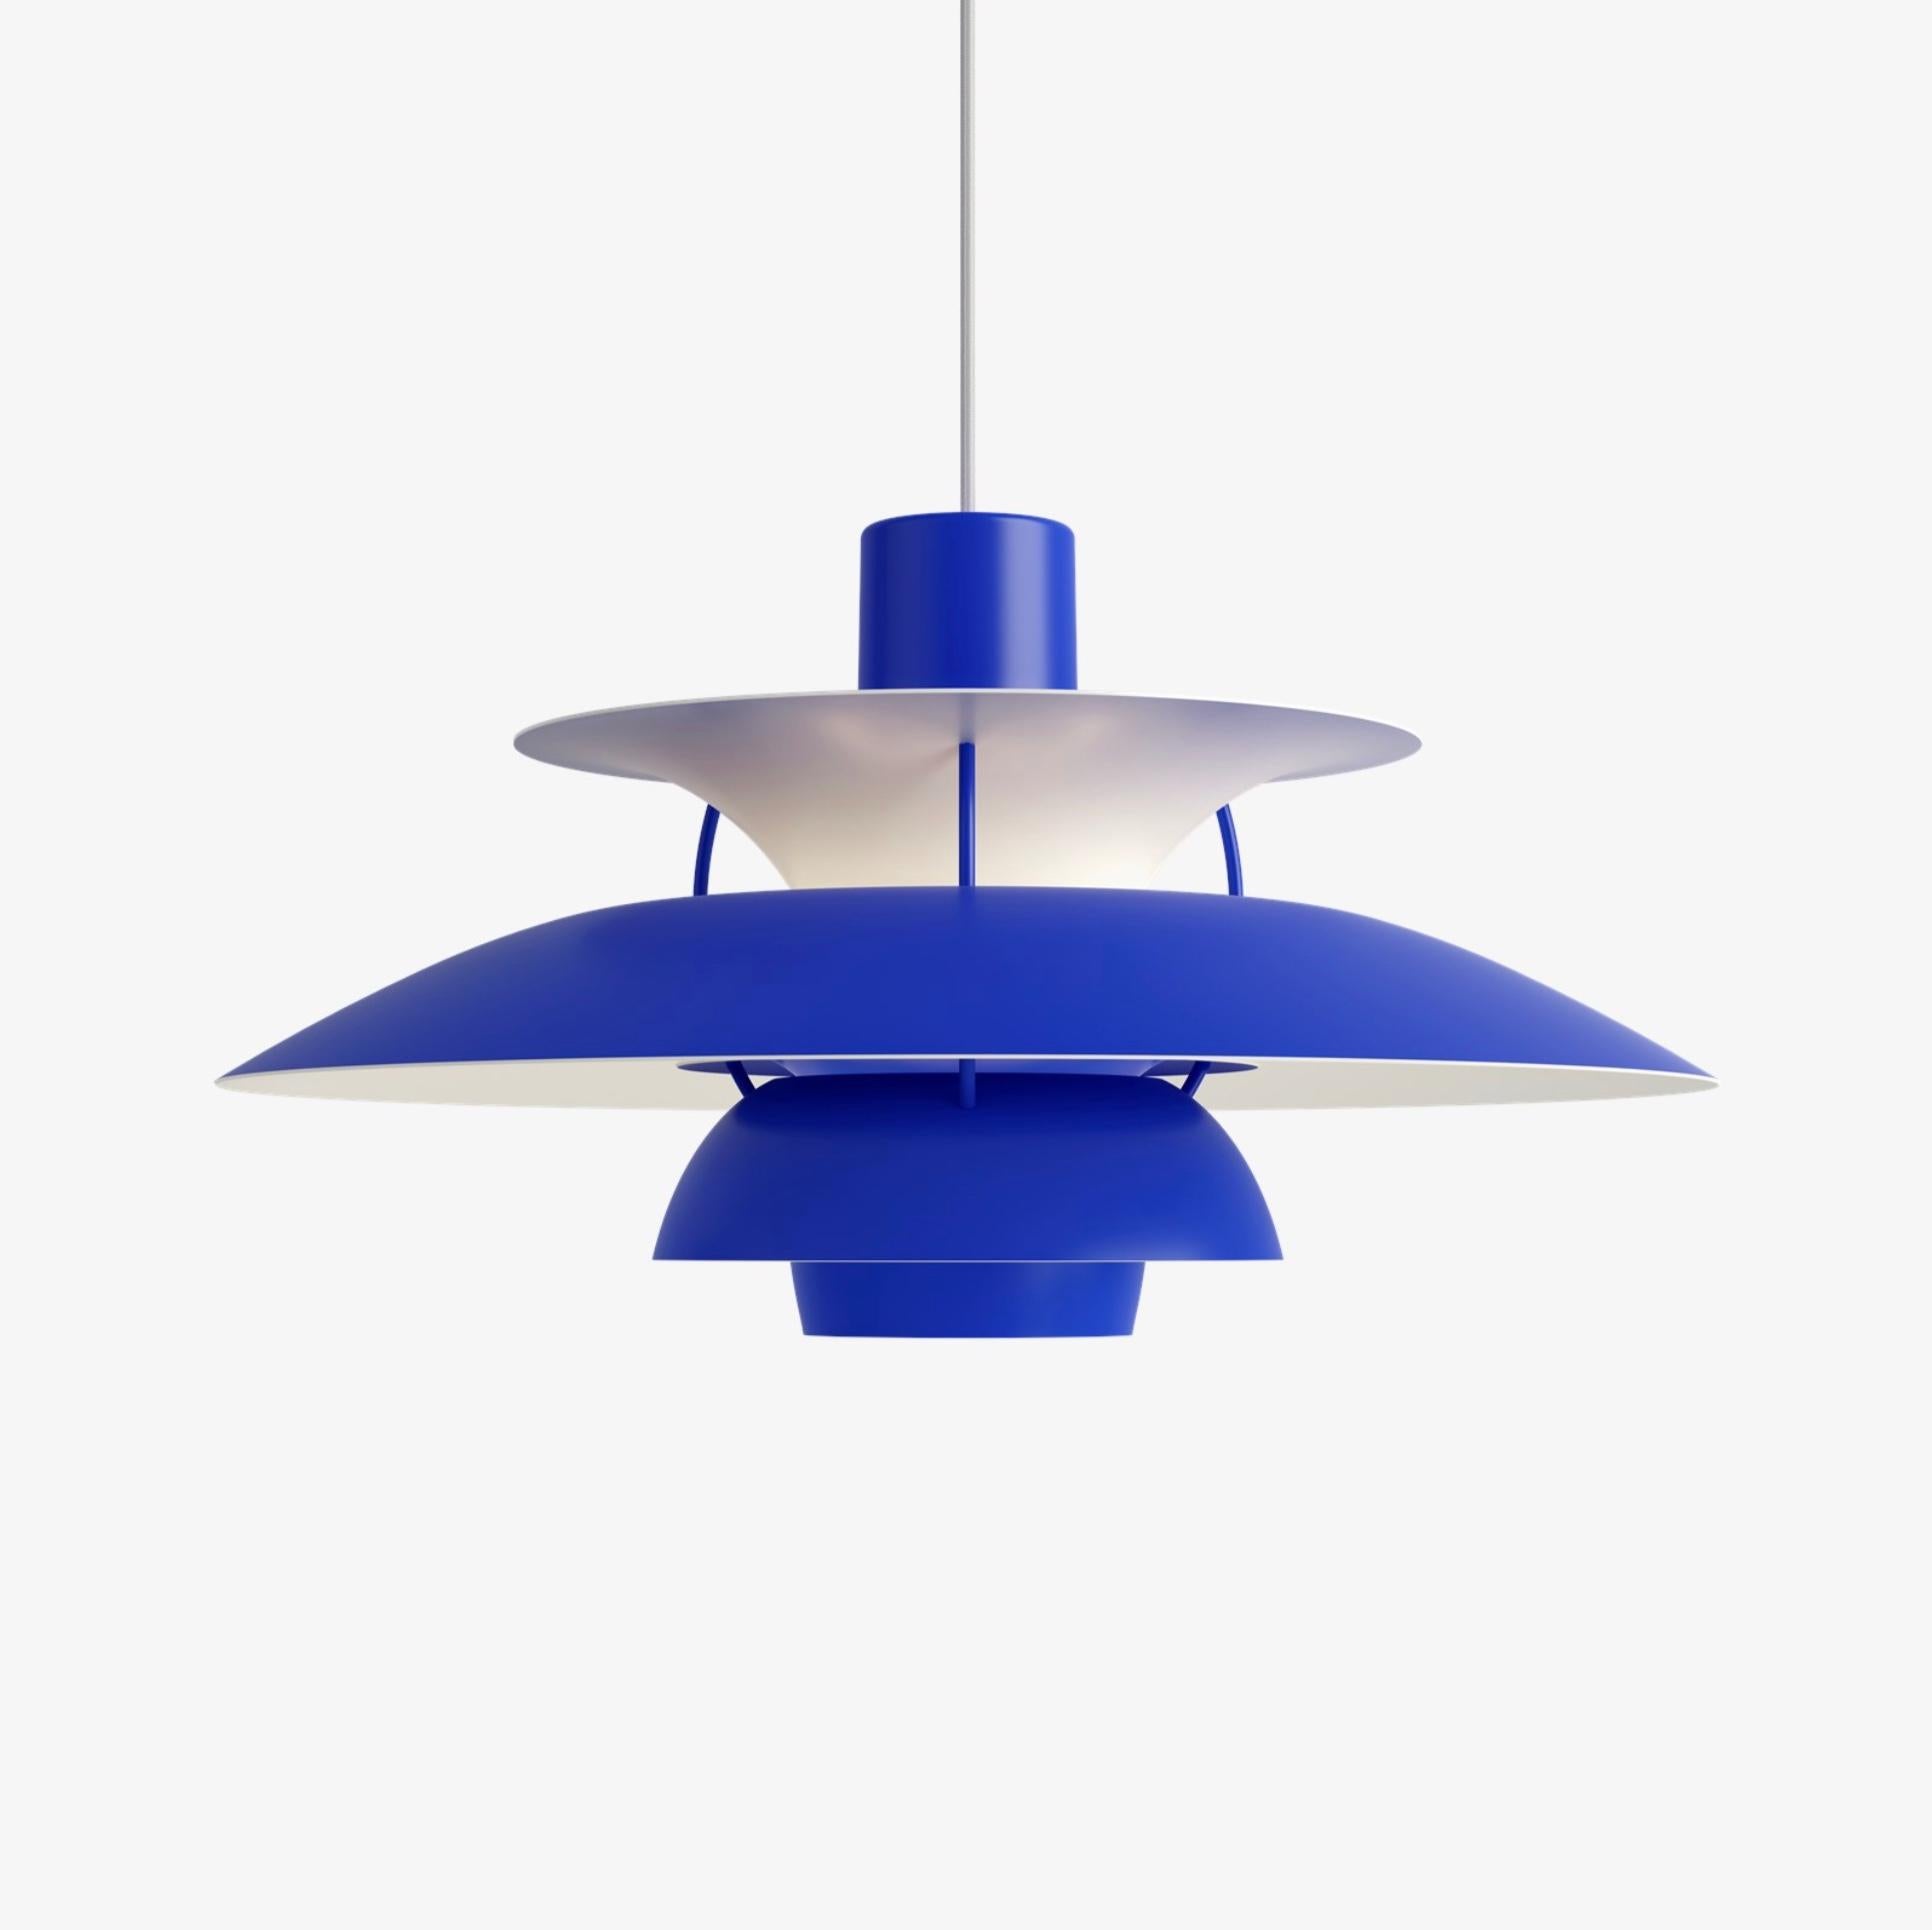 Poul Henningsen PH5 pendant for Louis Poulsen. Denmark. Designed in 1958. New, current production.

Poul Henningsen developed the PH 5 in 1958 in response to constant changes made to the shape and size of incandescent bulbs by bulb manufacturers,